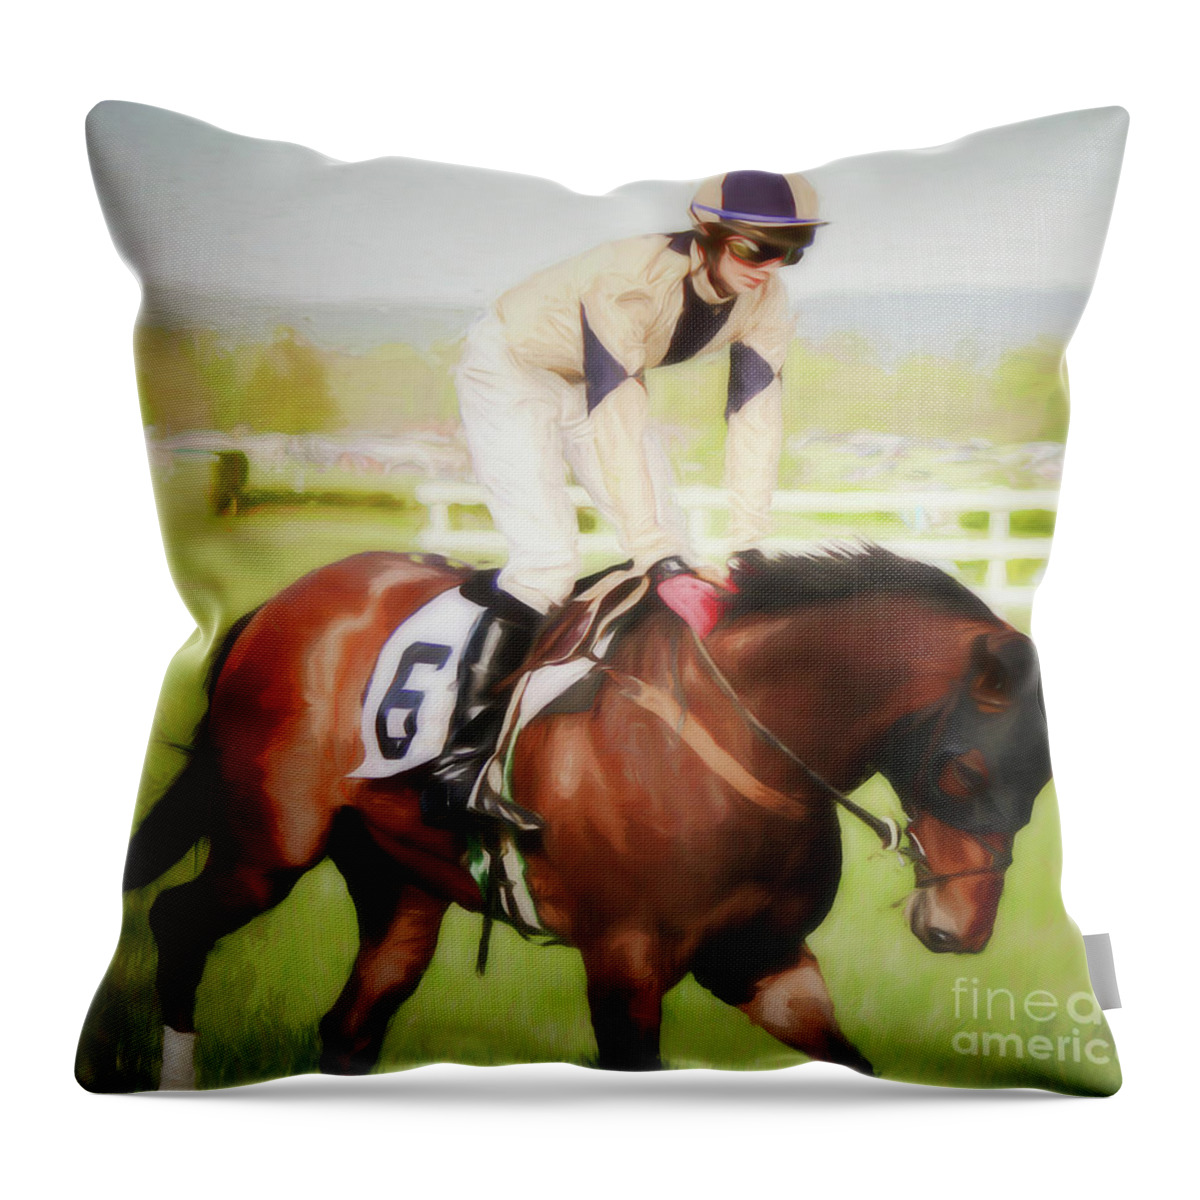 Steeplechase Throw Pillow featuring the photograph Number 6 by Ola Allen